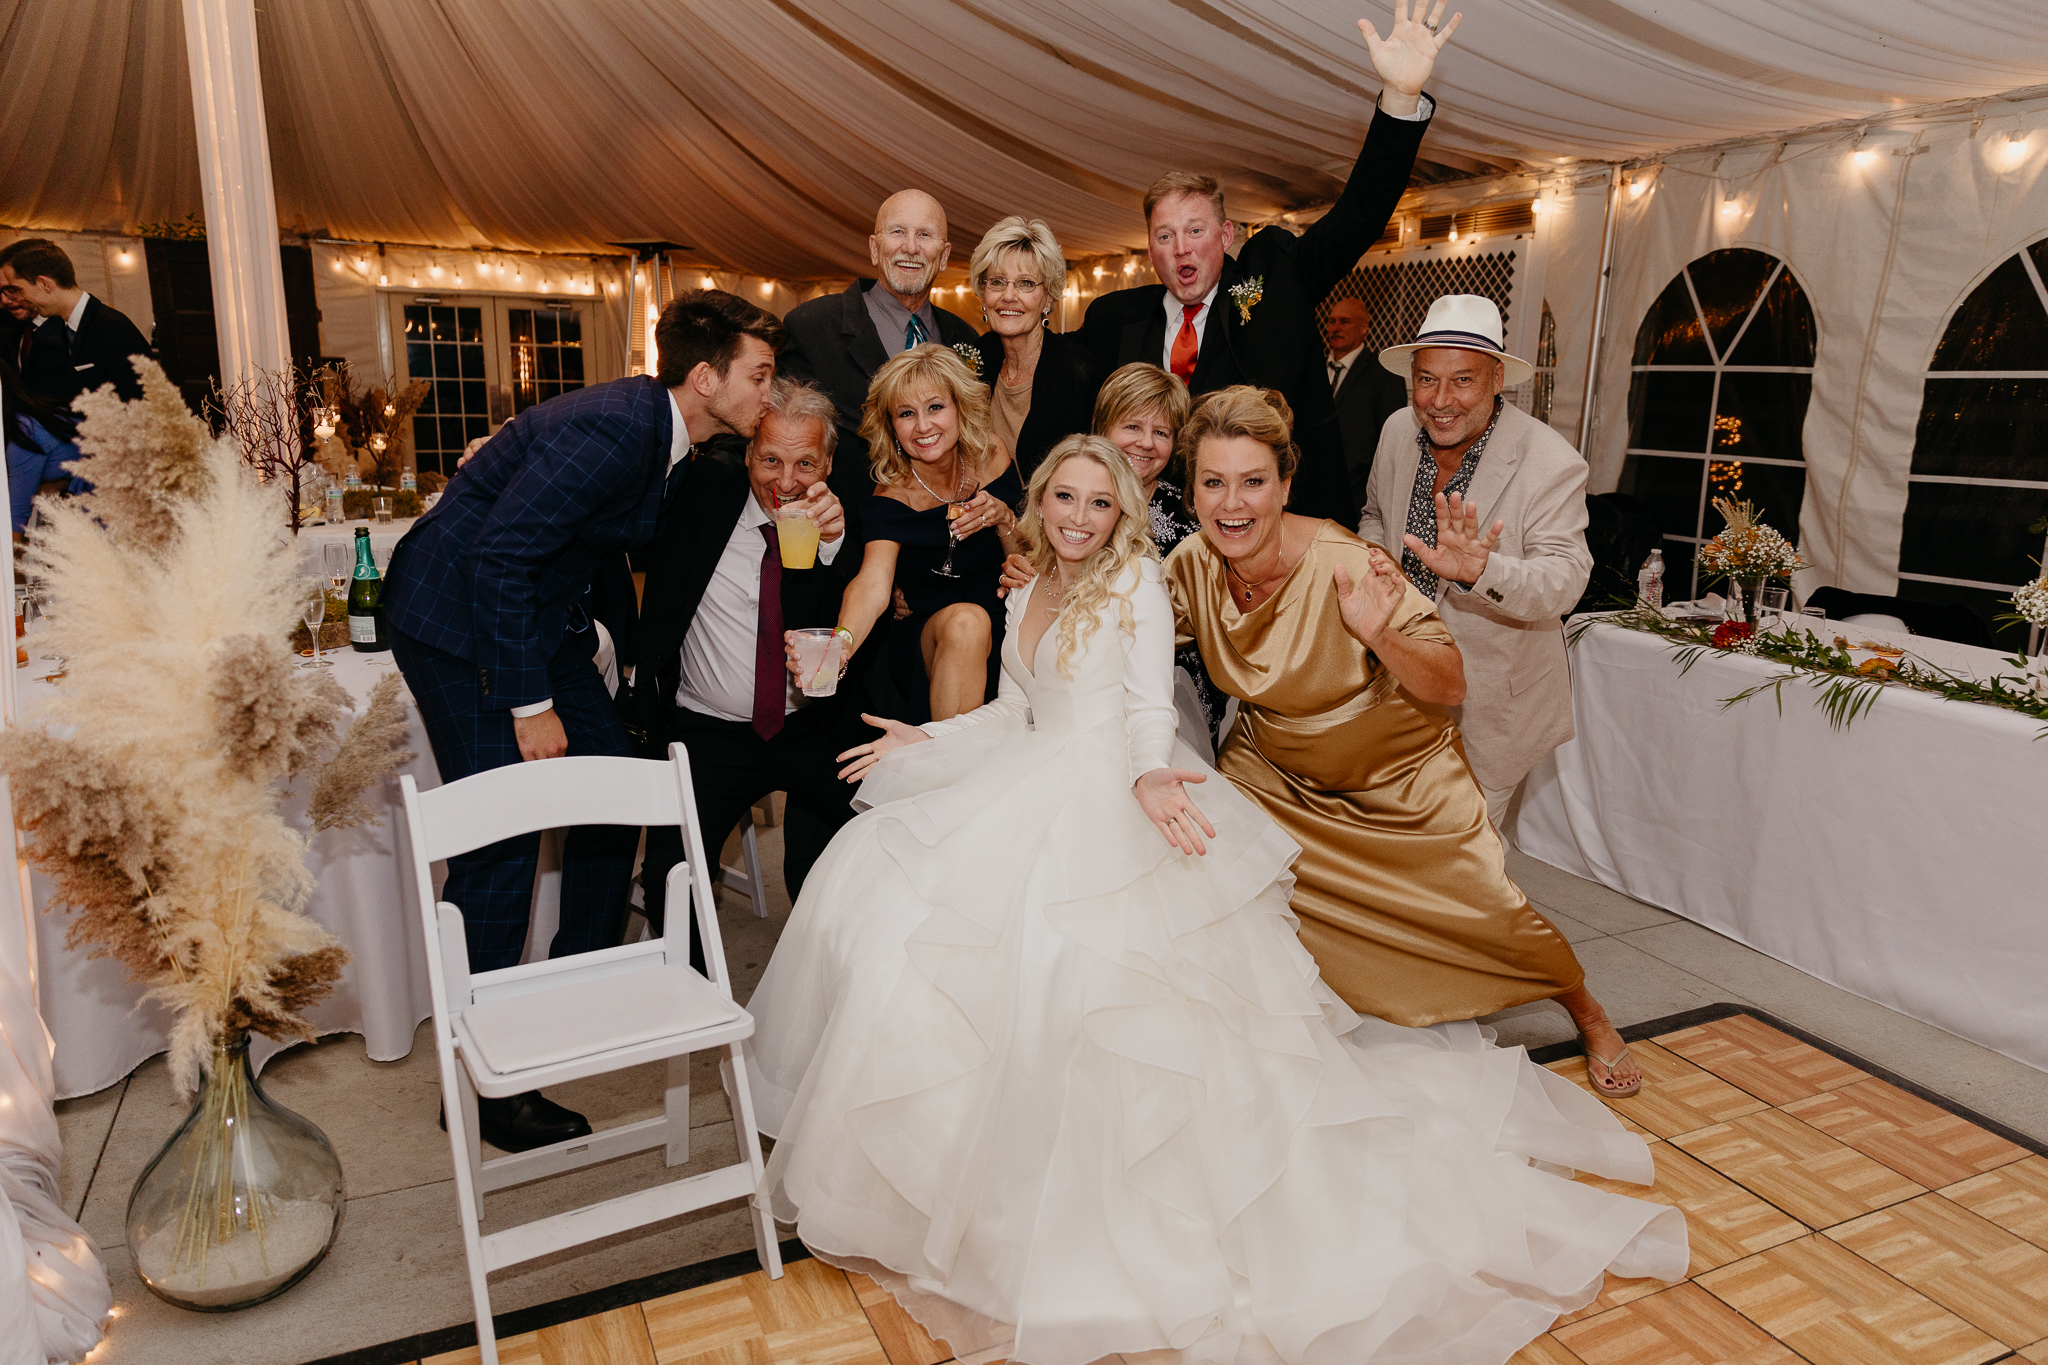 Bride and groom pose and smile with family and friends in a white tent wedding